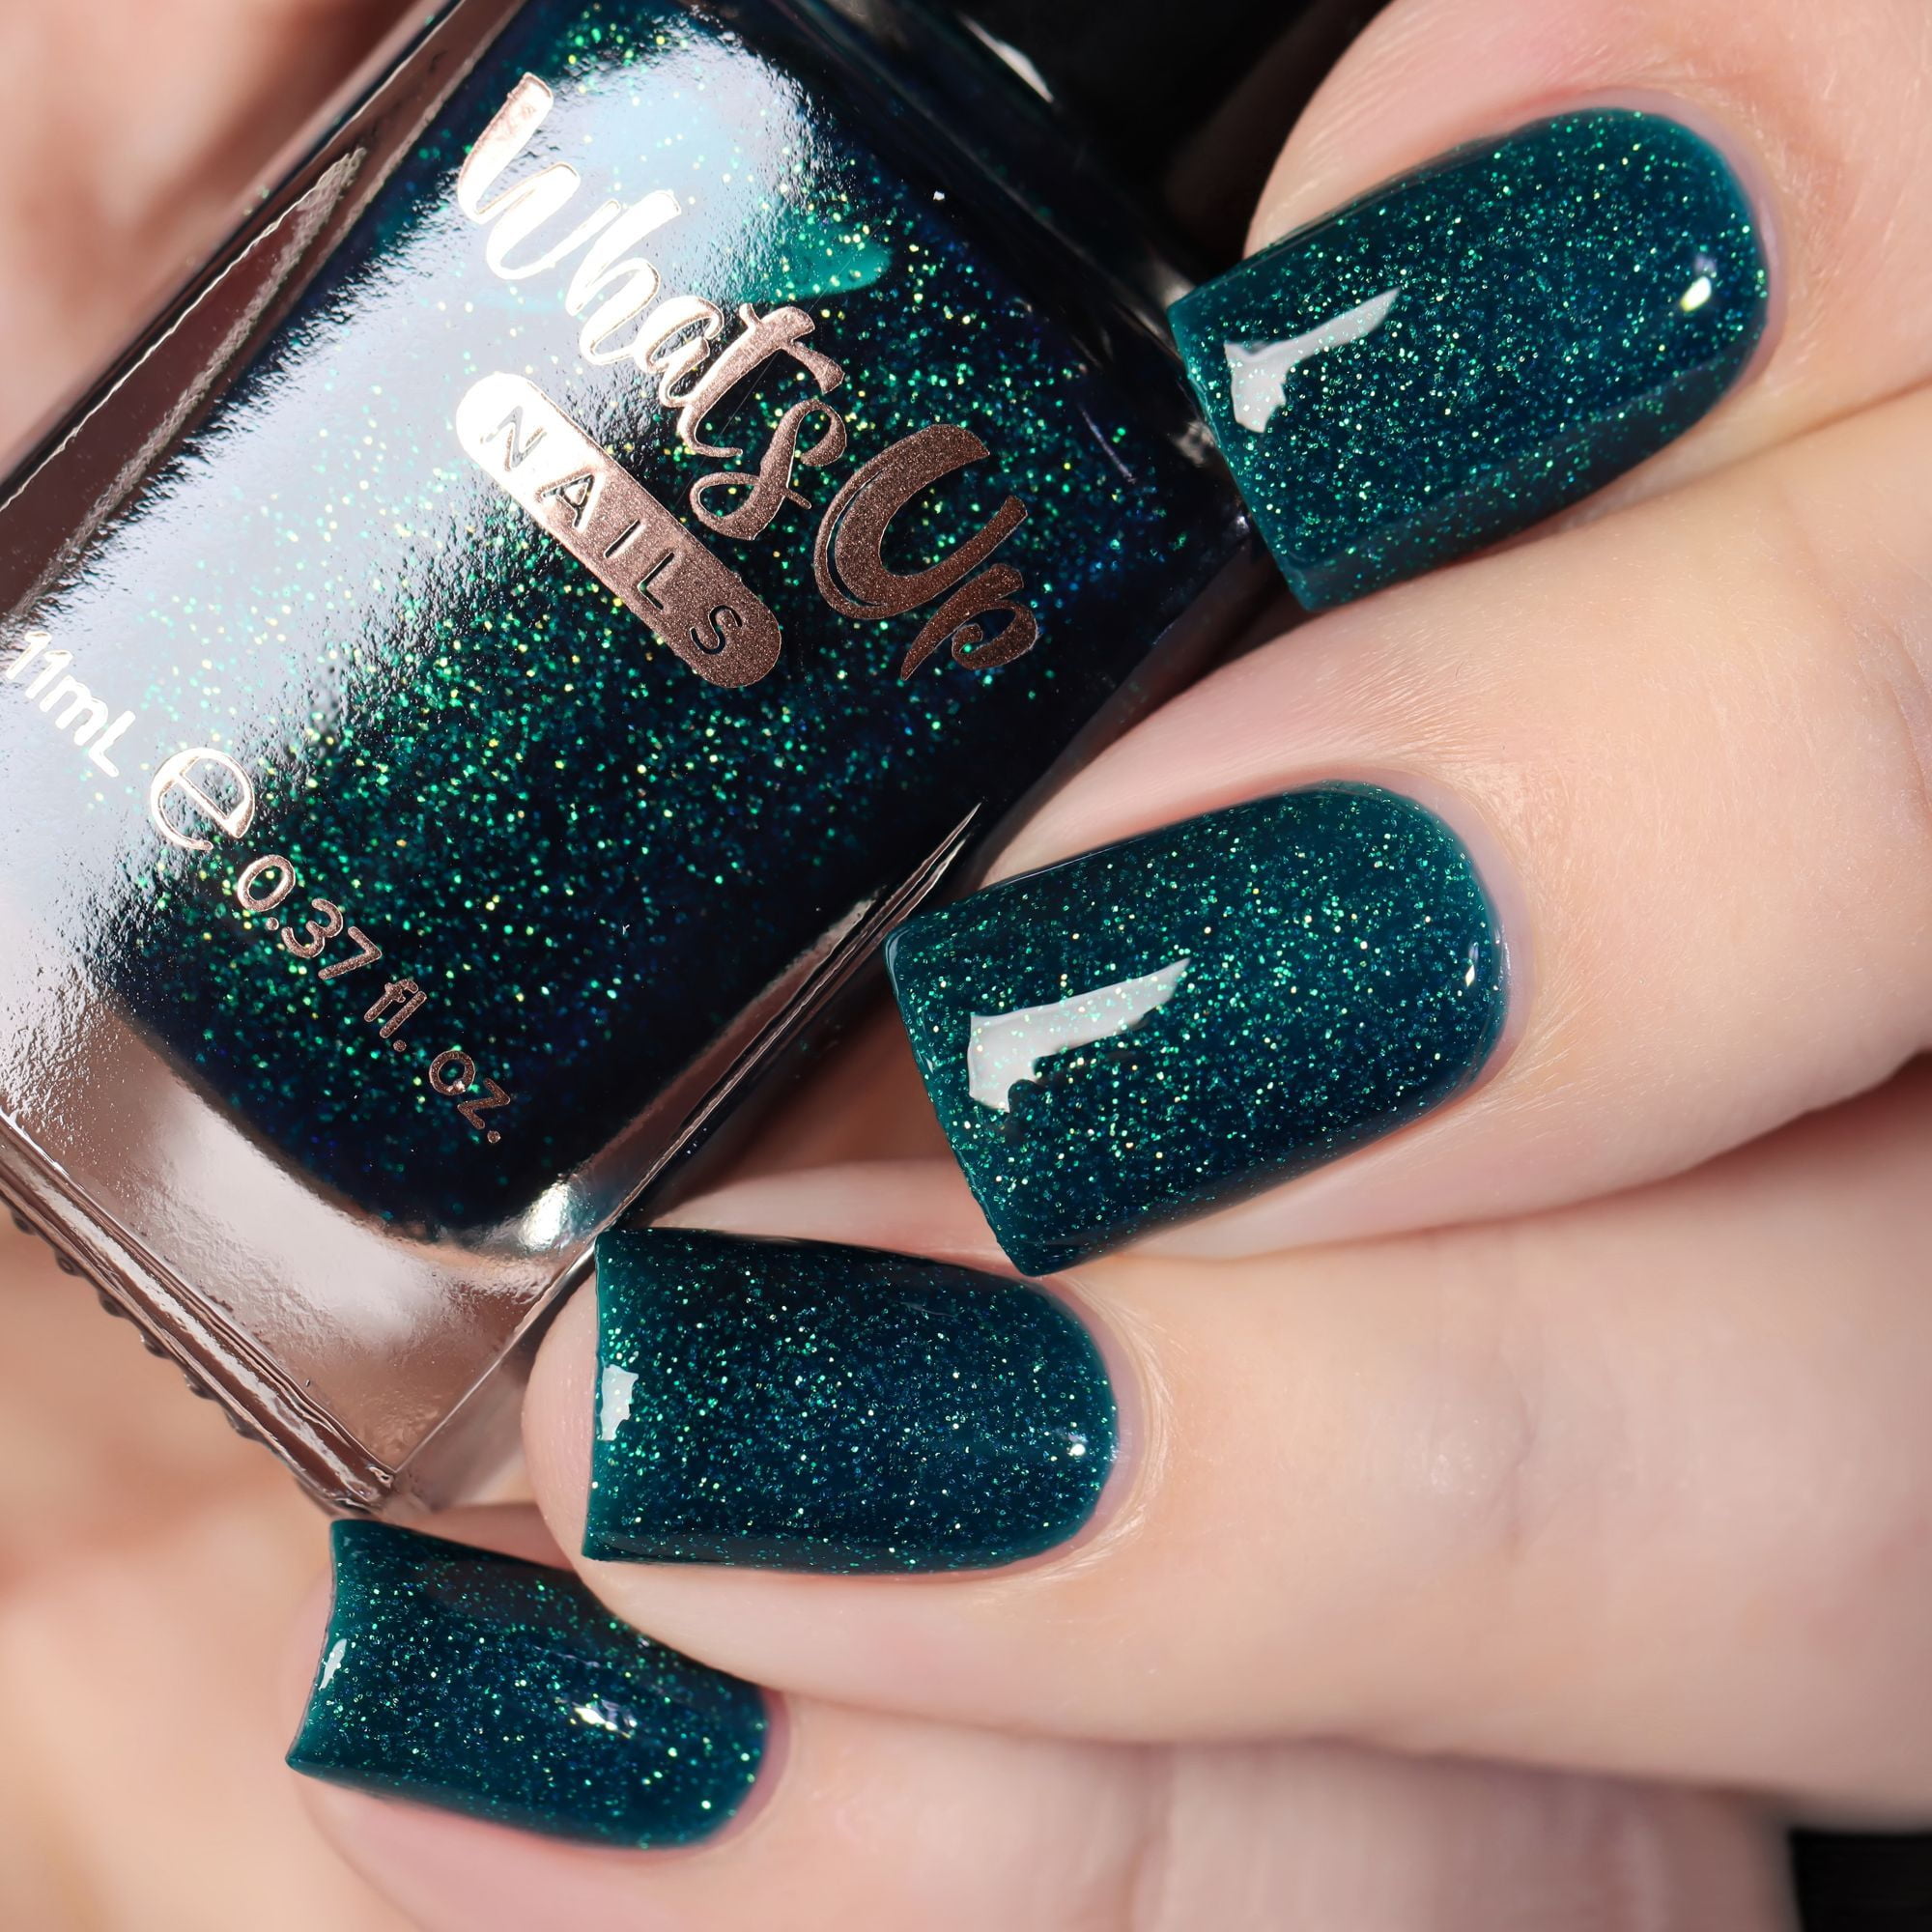 Whats Up Nails - Teal Good Moment Nail Polish Dark Teal with Gold to Green  Iridescent Glitter Lacquer Varnish Made in USA 12 Free Cruelty Free Vegan  Clean 